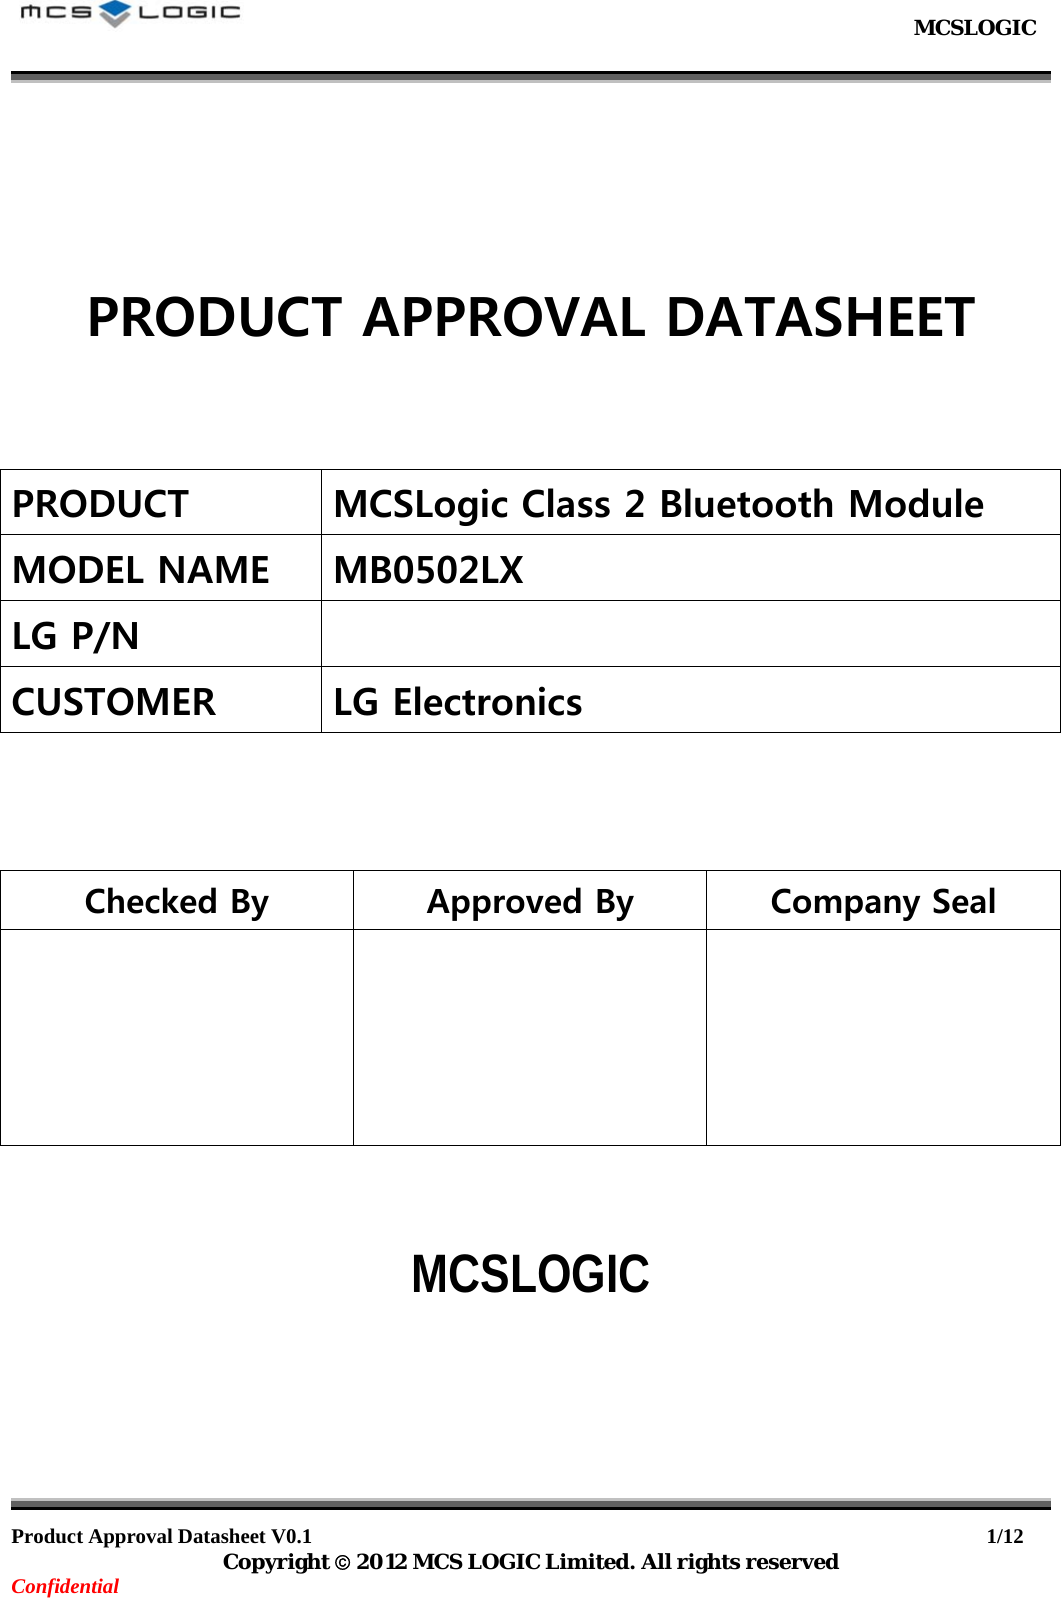                                                           MCSLOGIC                                                                                     Product Approval Datasheet V0.1                                                                  1/12 Copyright  2012 MCS LOGIC Limited. All rights reserved Confidential       PRODUCT APPROVAL DATASHEET    PRODUCT MCSLogic Class 2 Bluetooth Module MODEL NAME MB0502LX LG P/N    CUSTOMER  LG Electronics    Checked By  Approved By  Company Seal        MCSLOGIC        